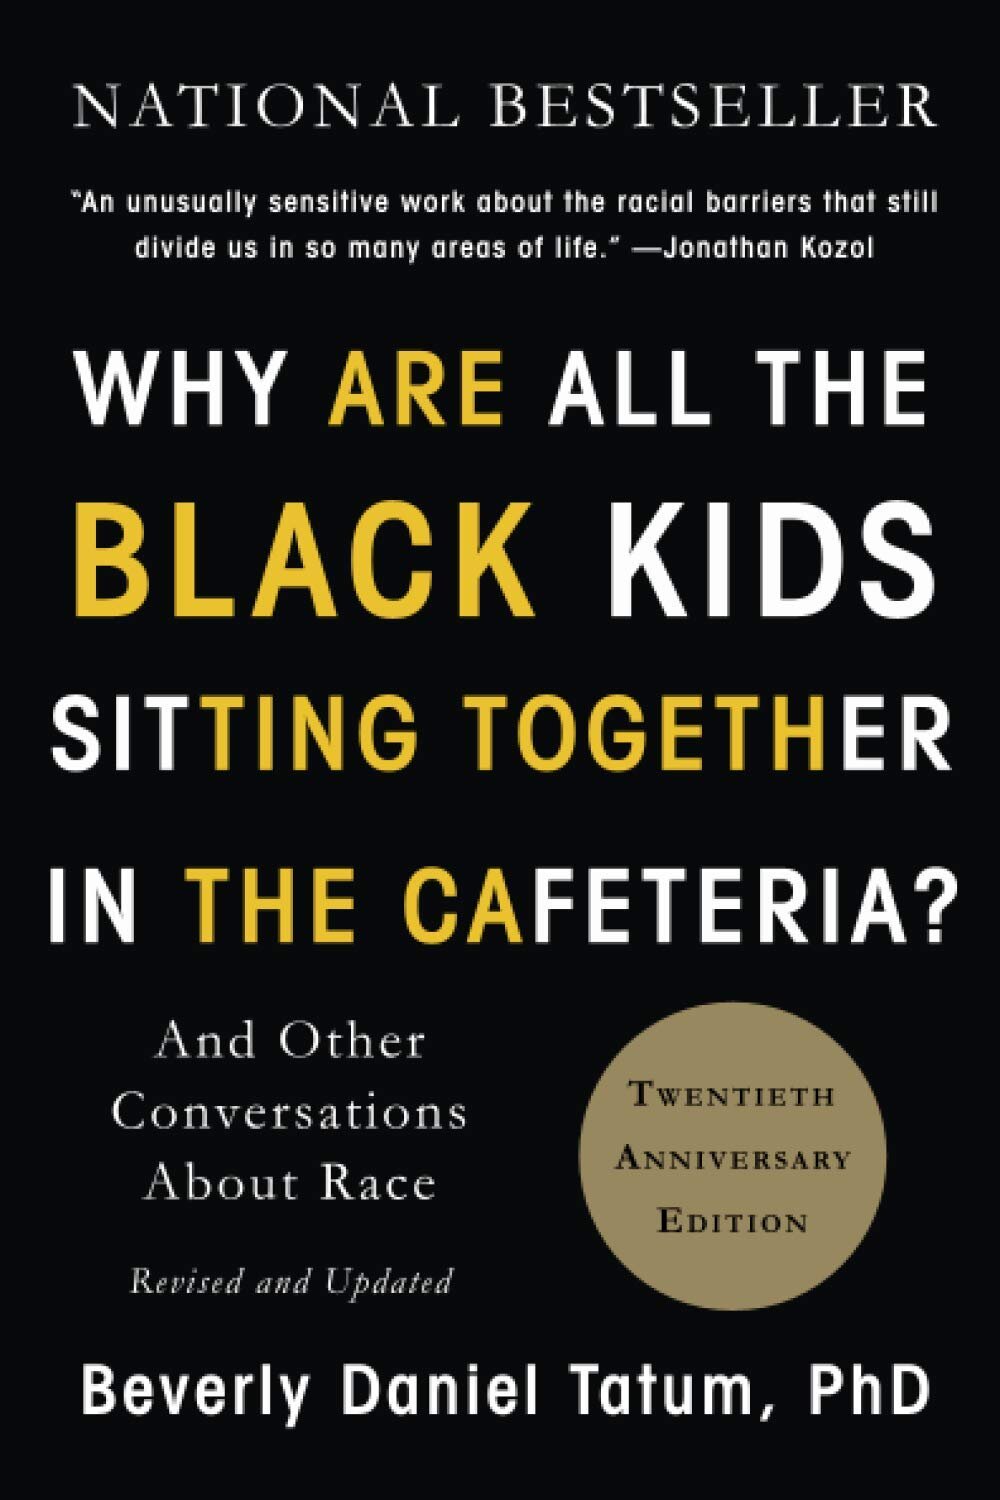 justice - why are all the black kids sitting together in the cafeteria.jpg